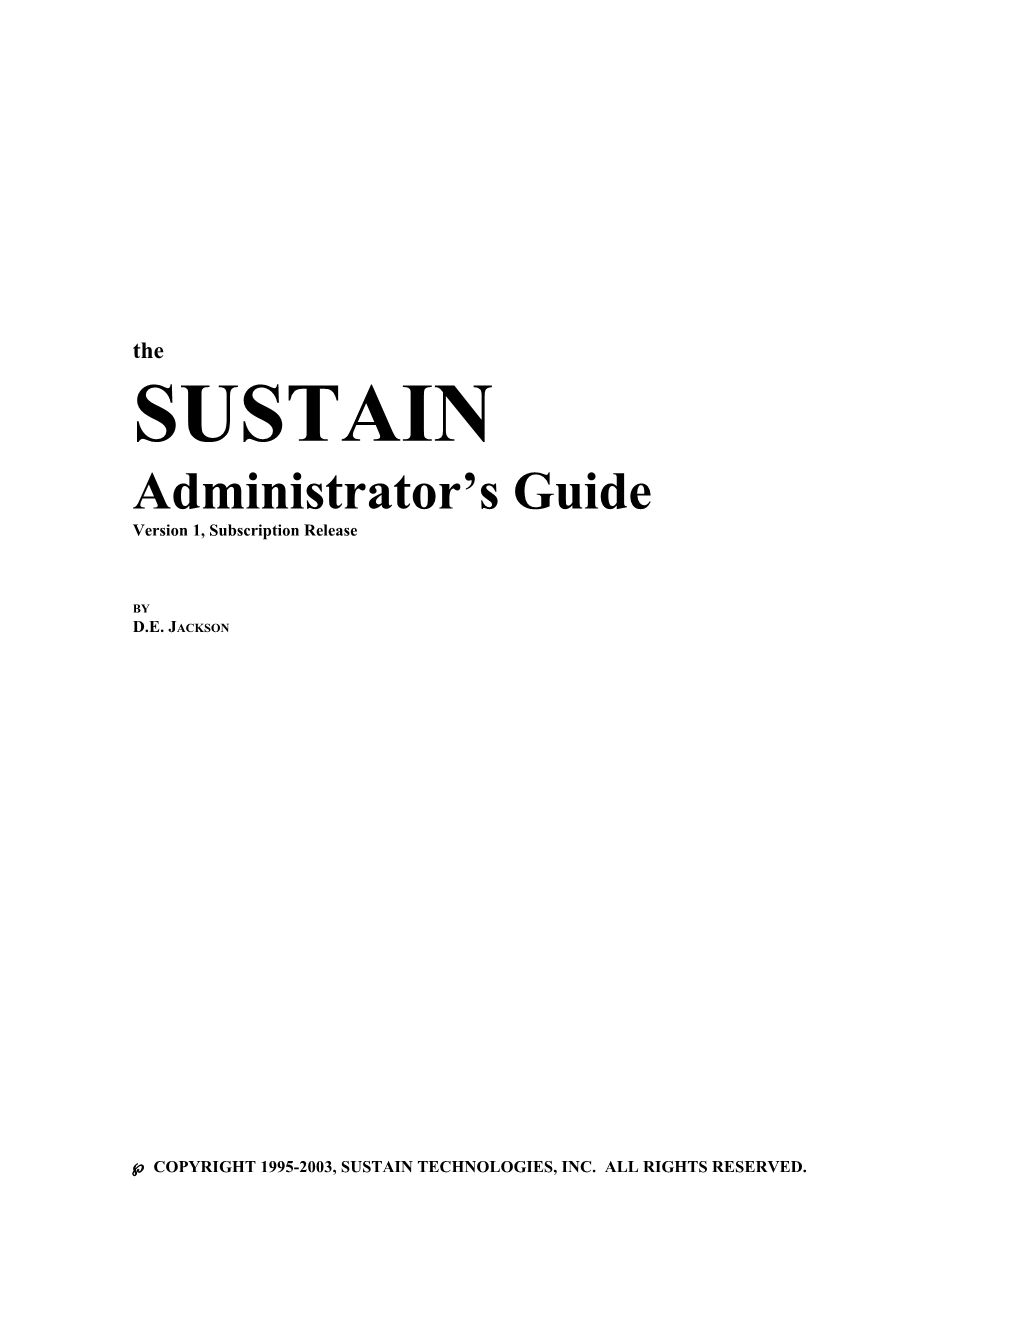 The SUSTAIN Administrator's Guide